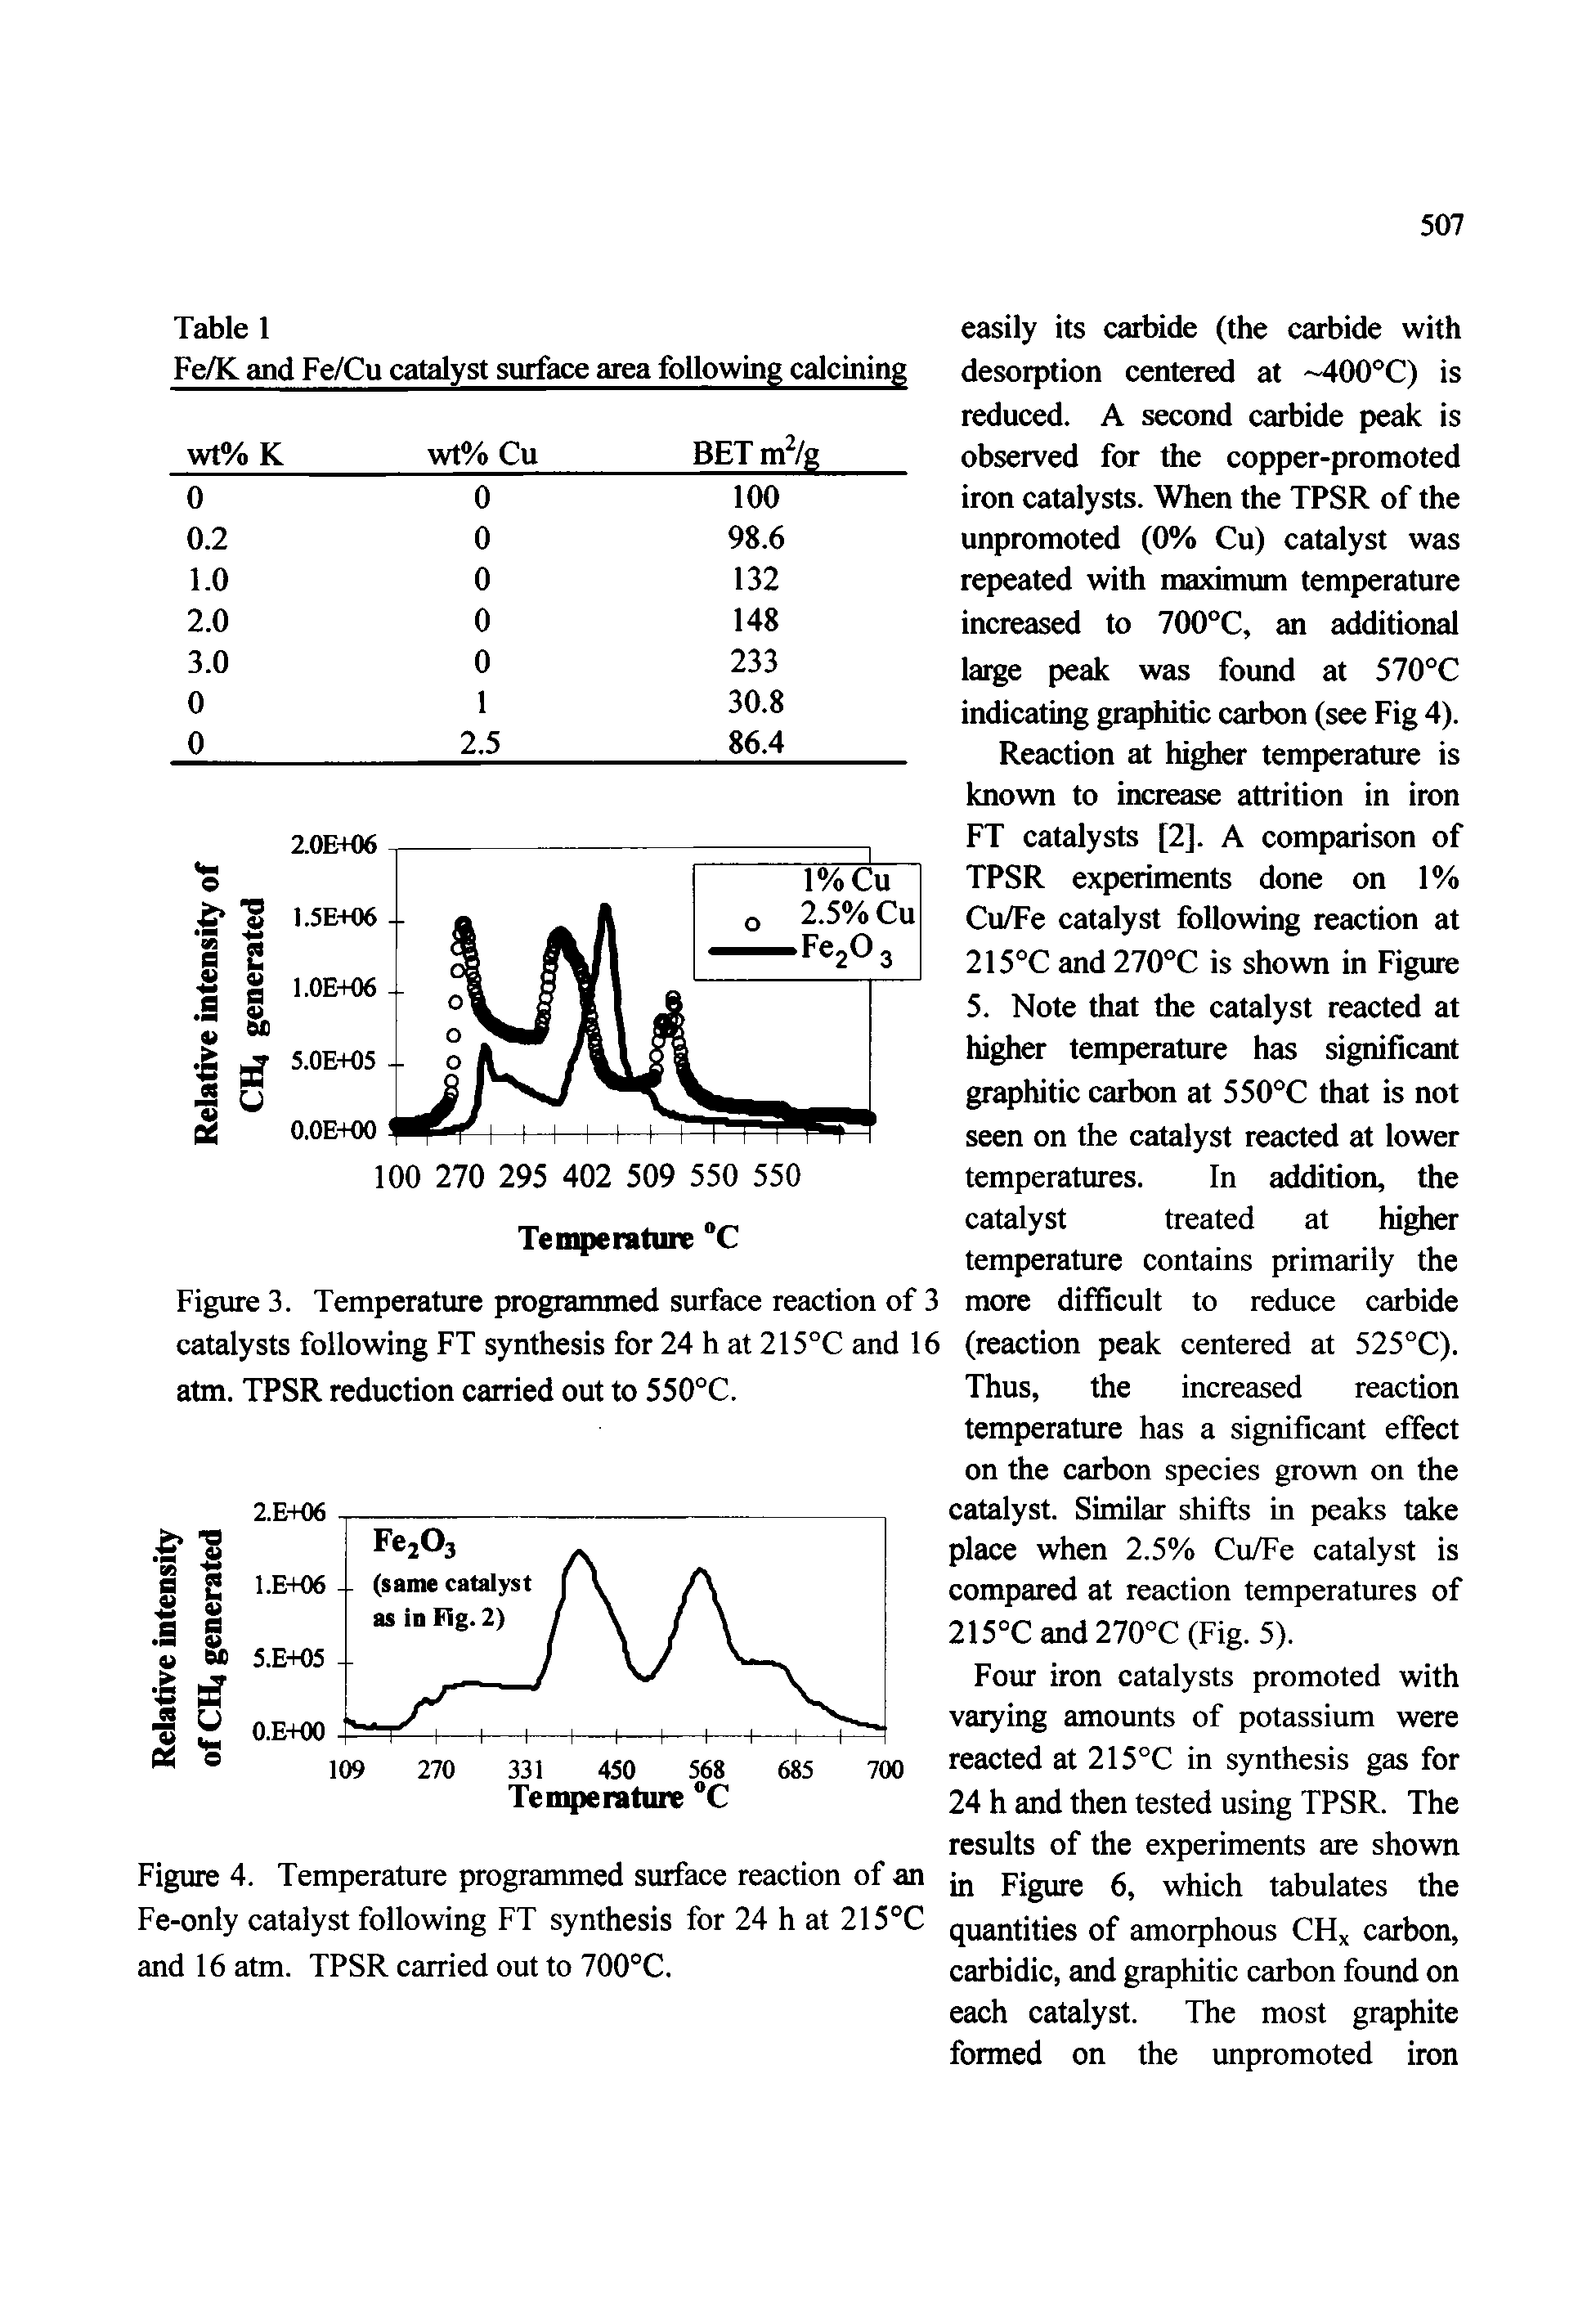 Figure 3. Temperature programmed surface reaction of 3 catalysts following FT synthesis for 24 h at 215°C and 16 atm. TPSR reduction carried out to 550°C.